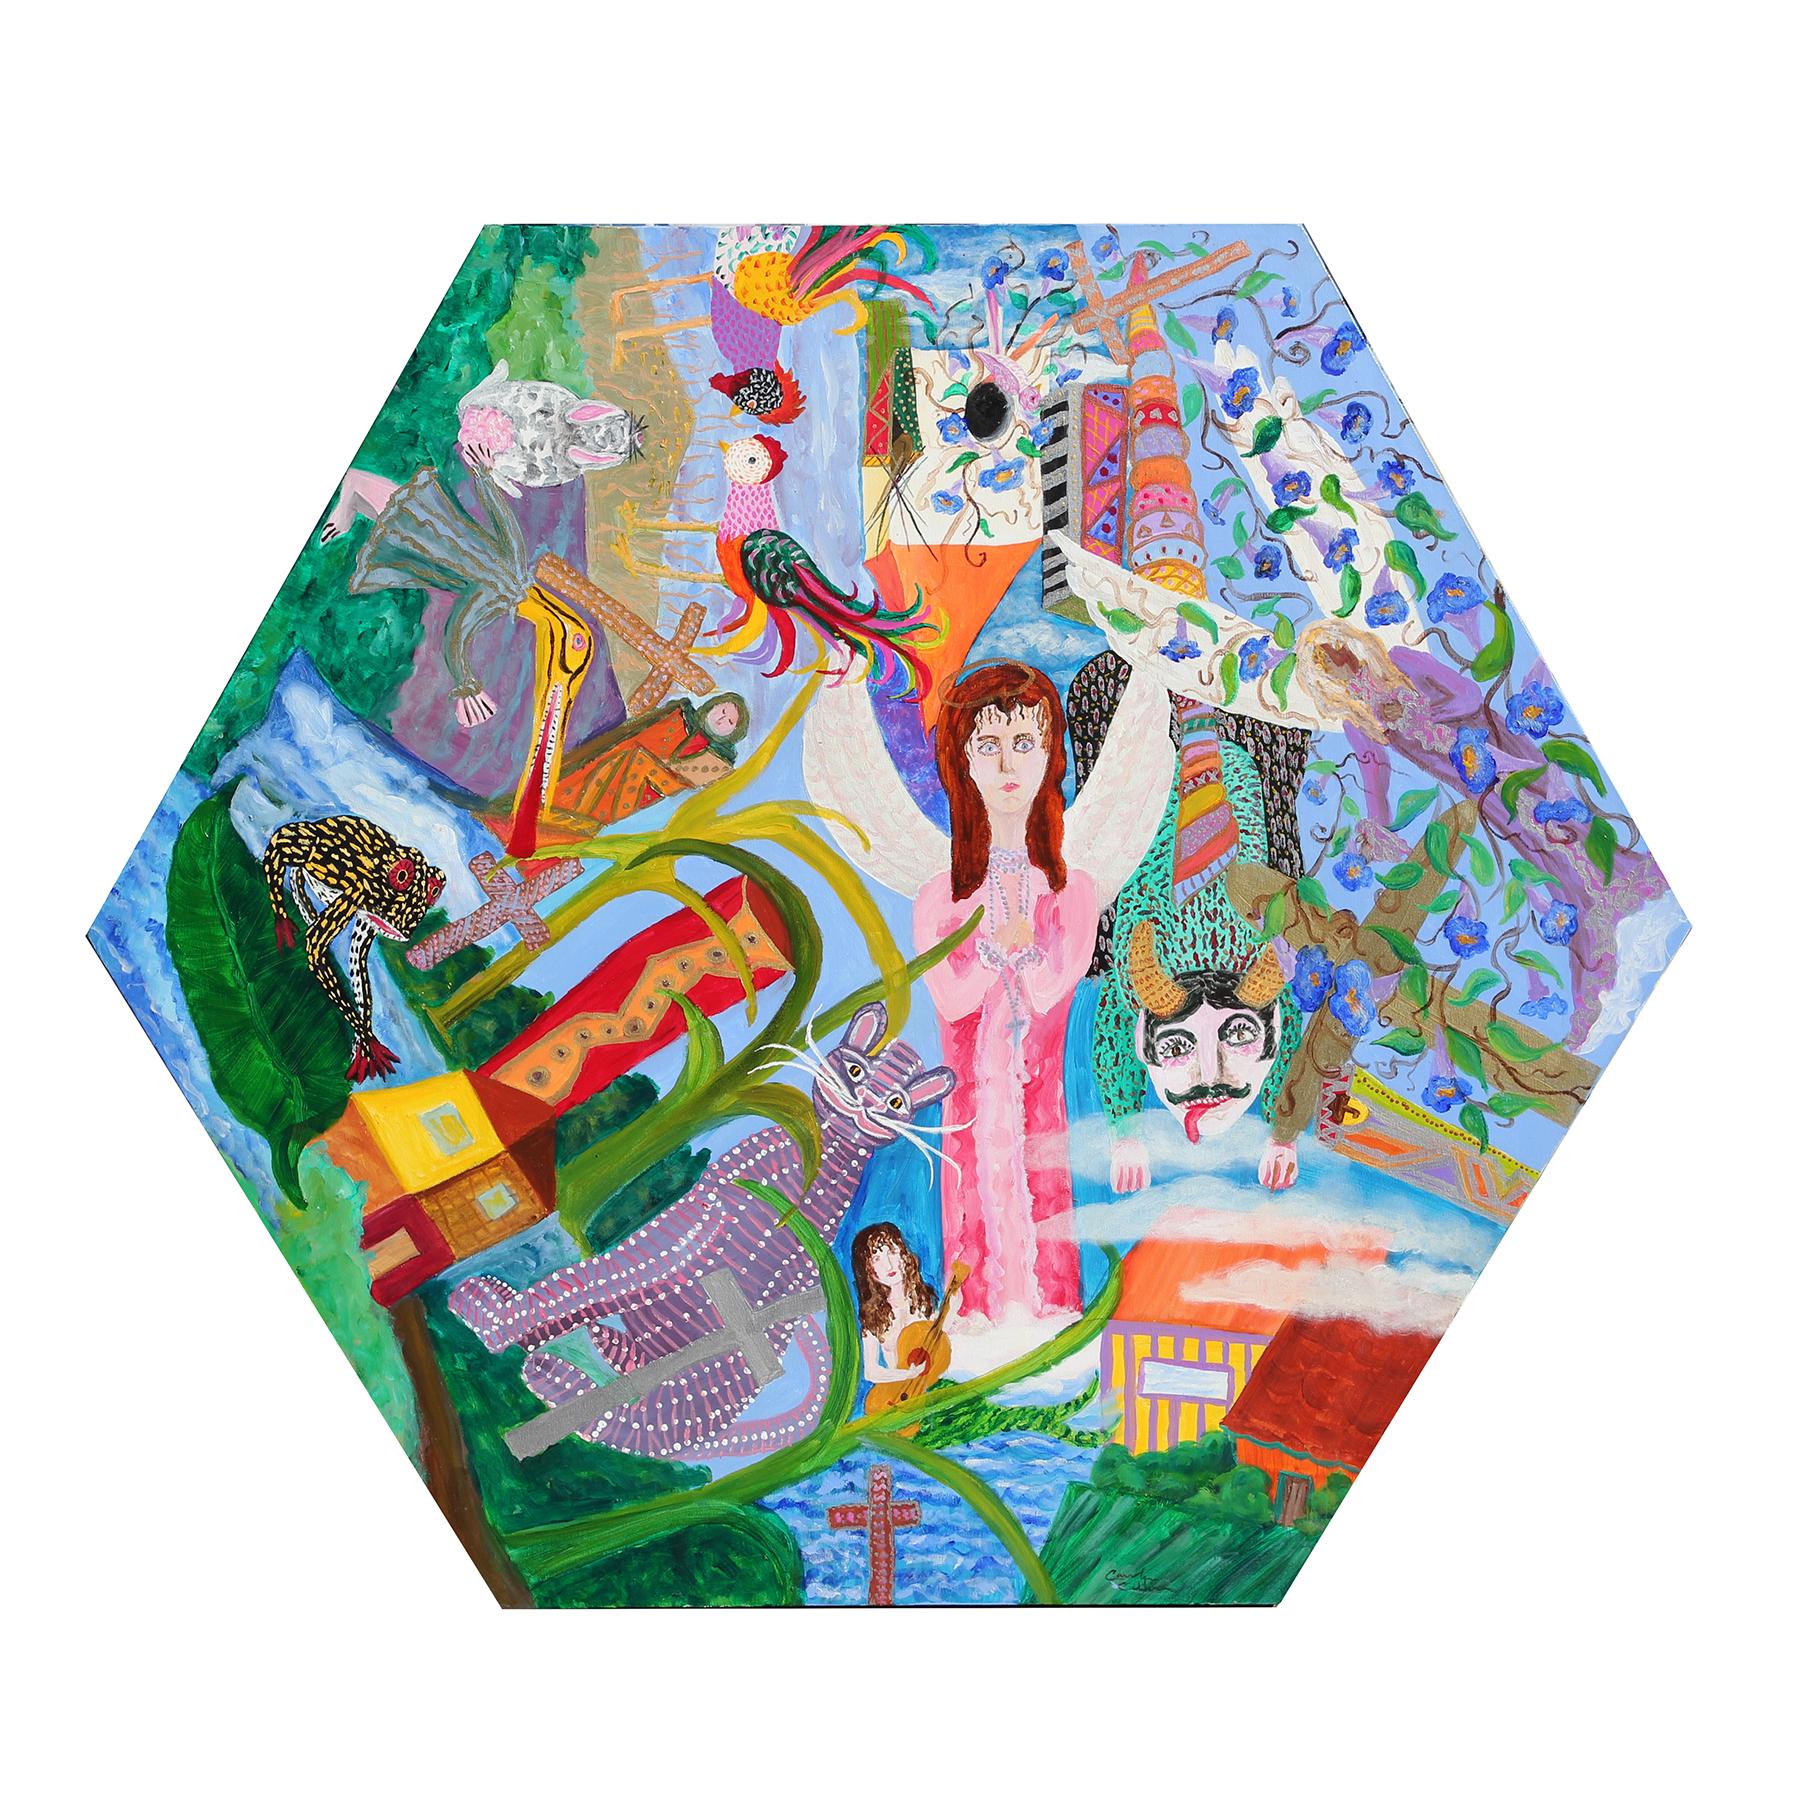 Carolyn Oliver Figurative Painting - "Celebration of Life" Colorful Abstract Figurative Hexagon Canvas Painting 